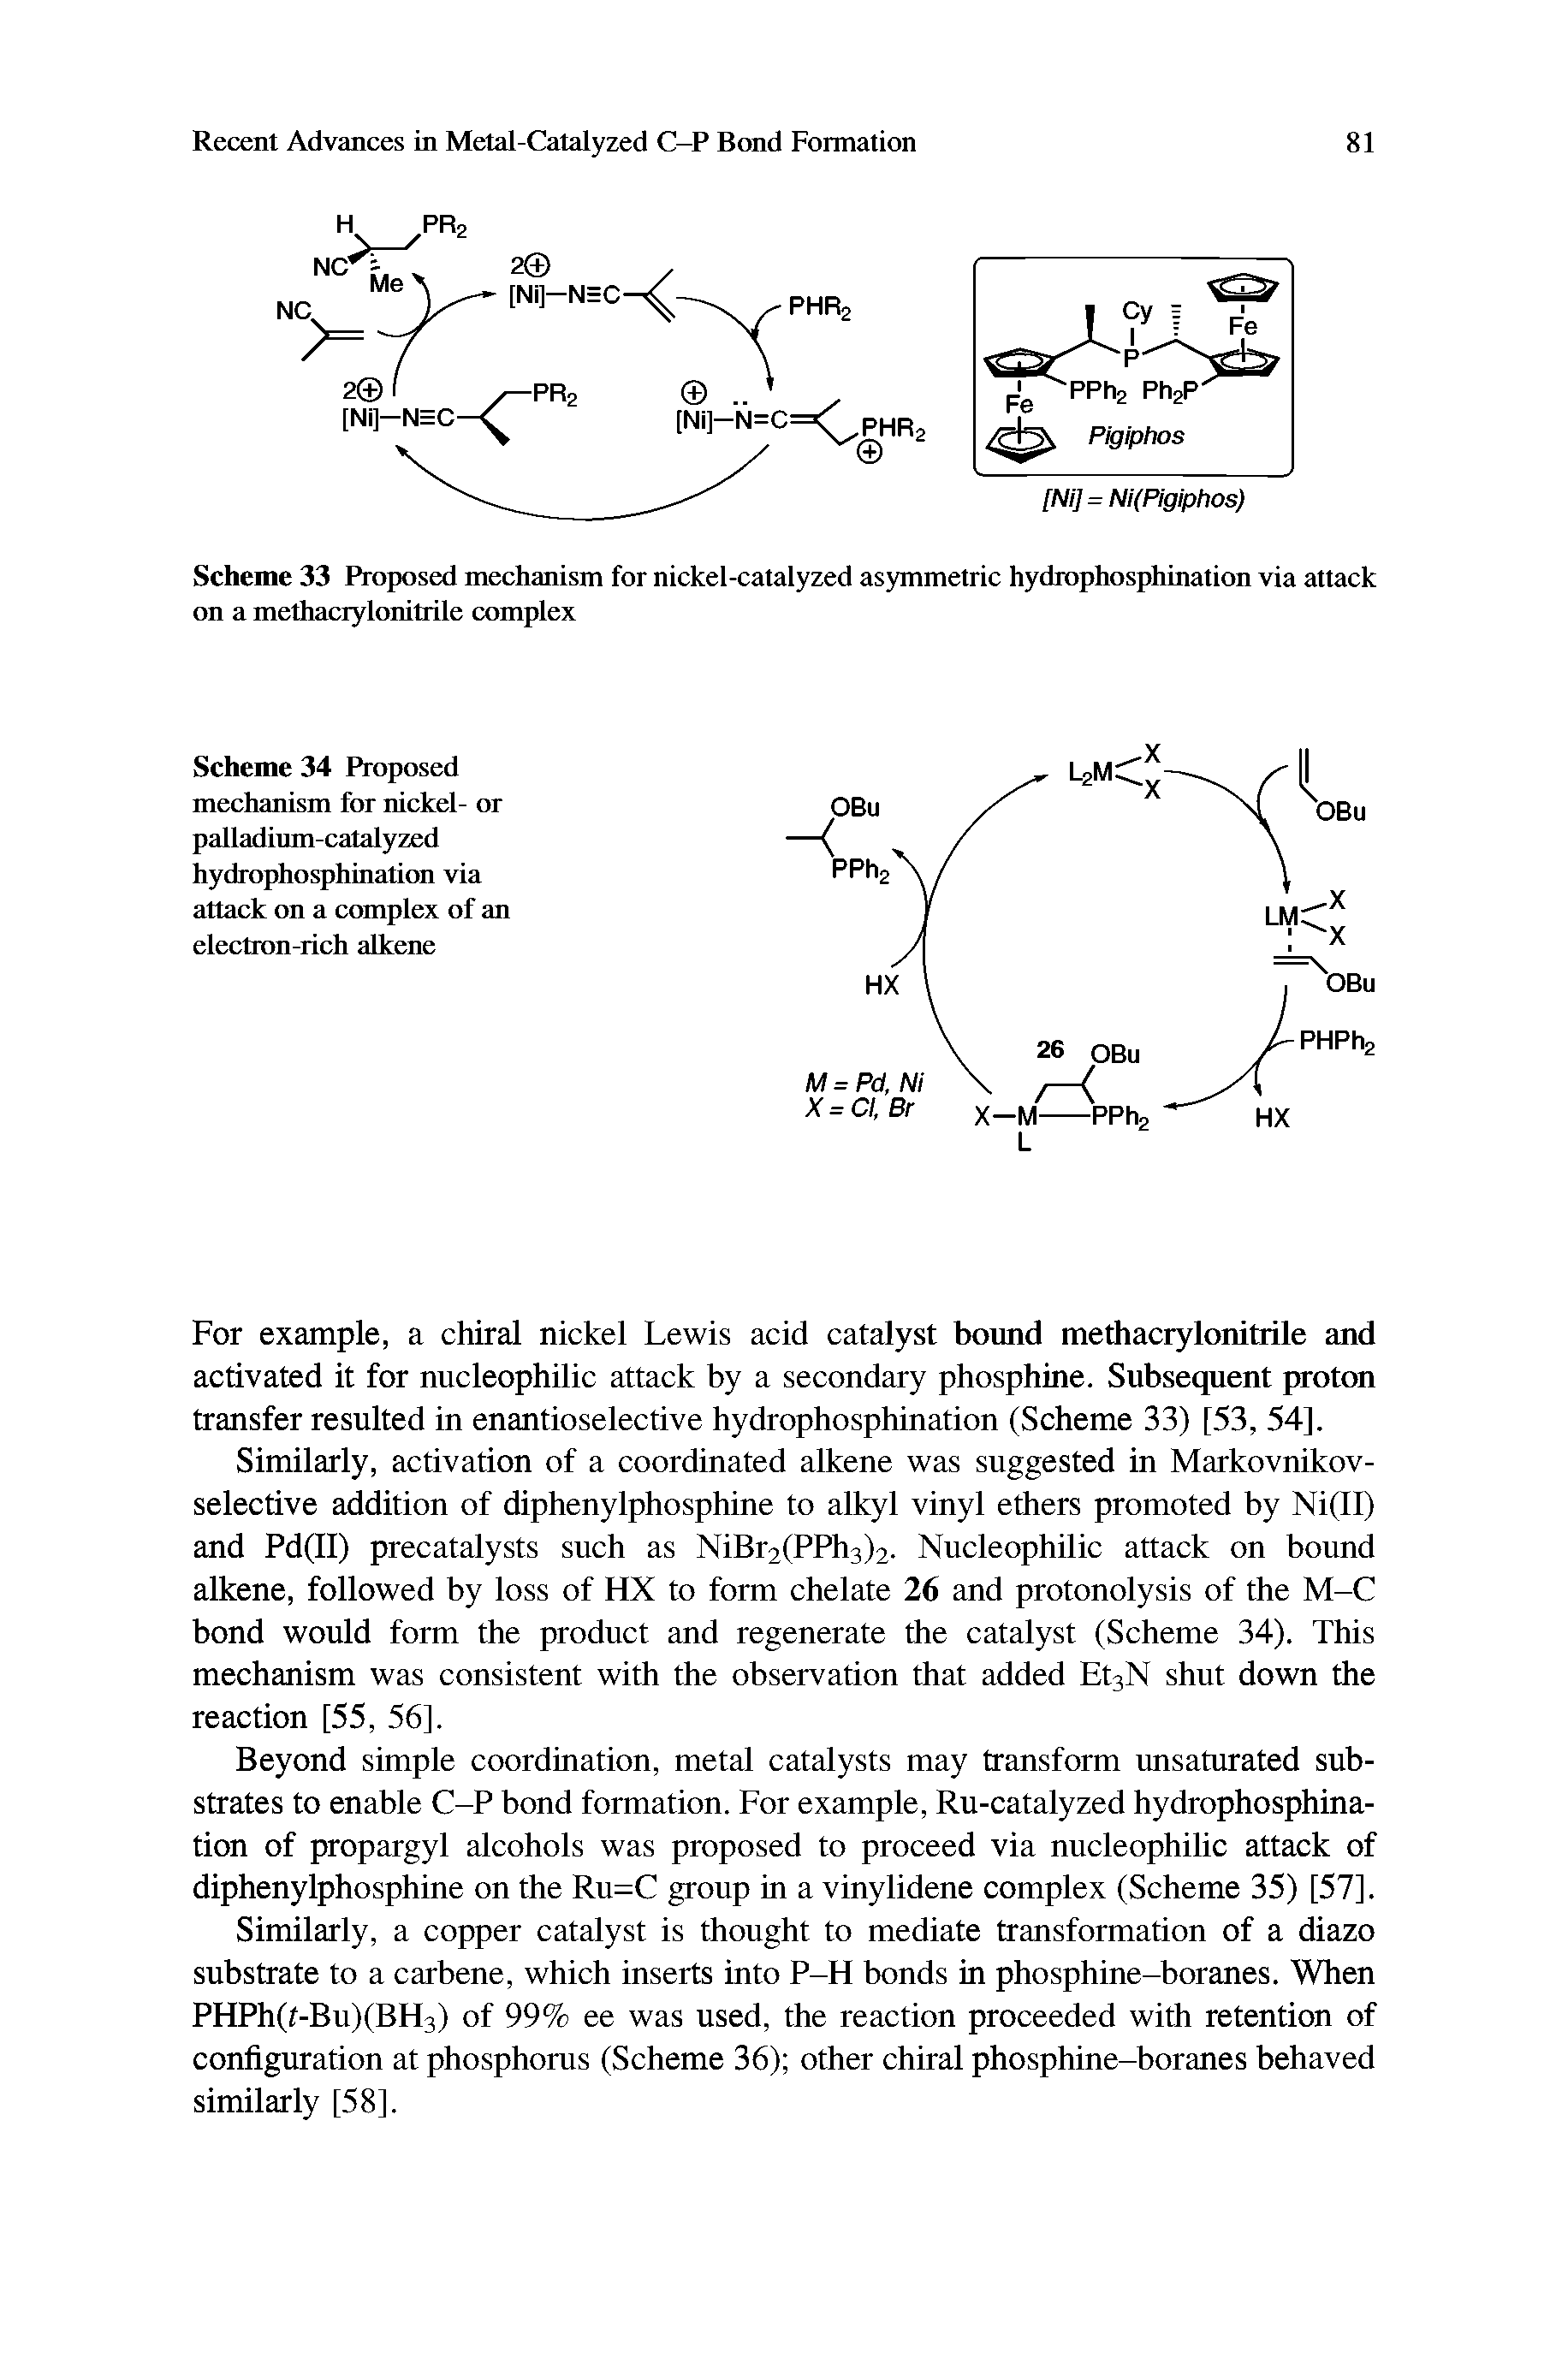 Scheme 33 Proposed mechanism for nickel-catalyzed asymmetric hydrophosphination via attack on a methacrylonitrile complex...